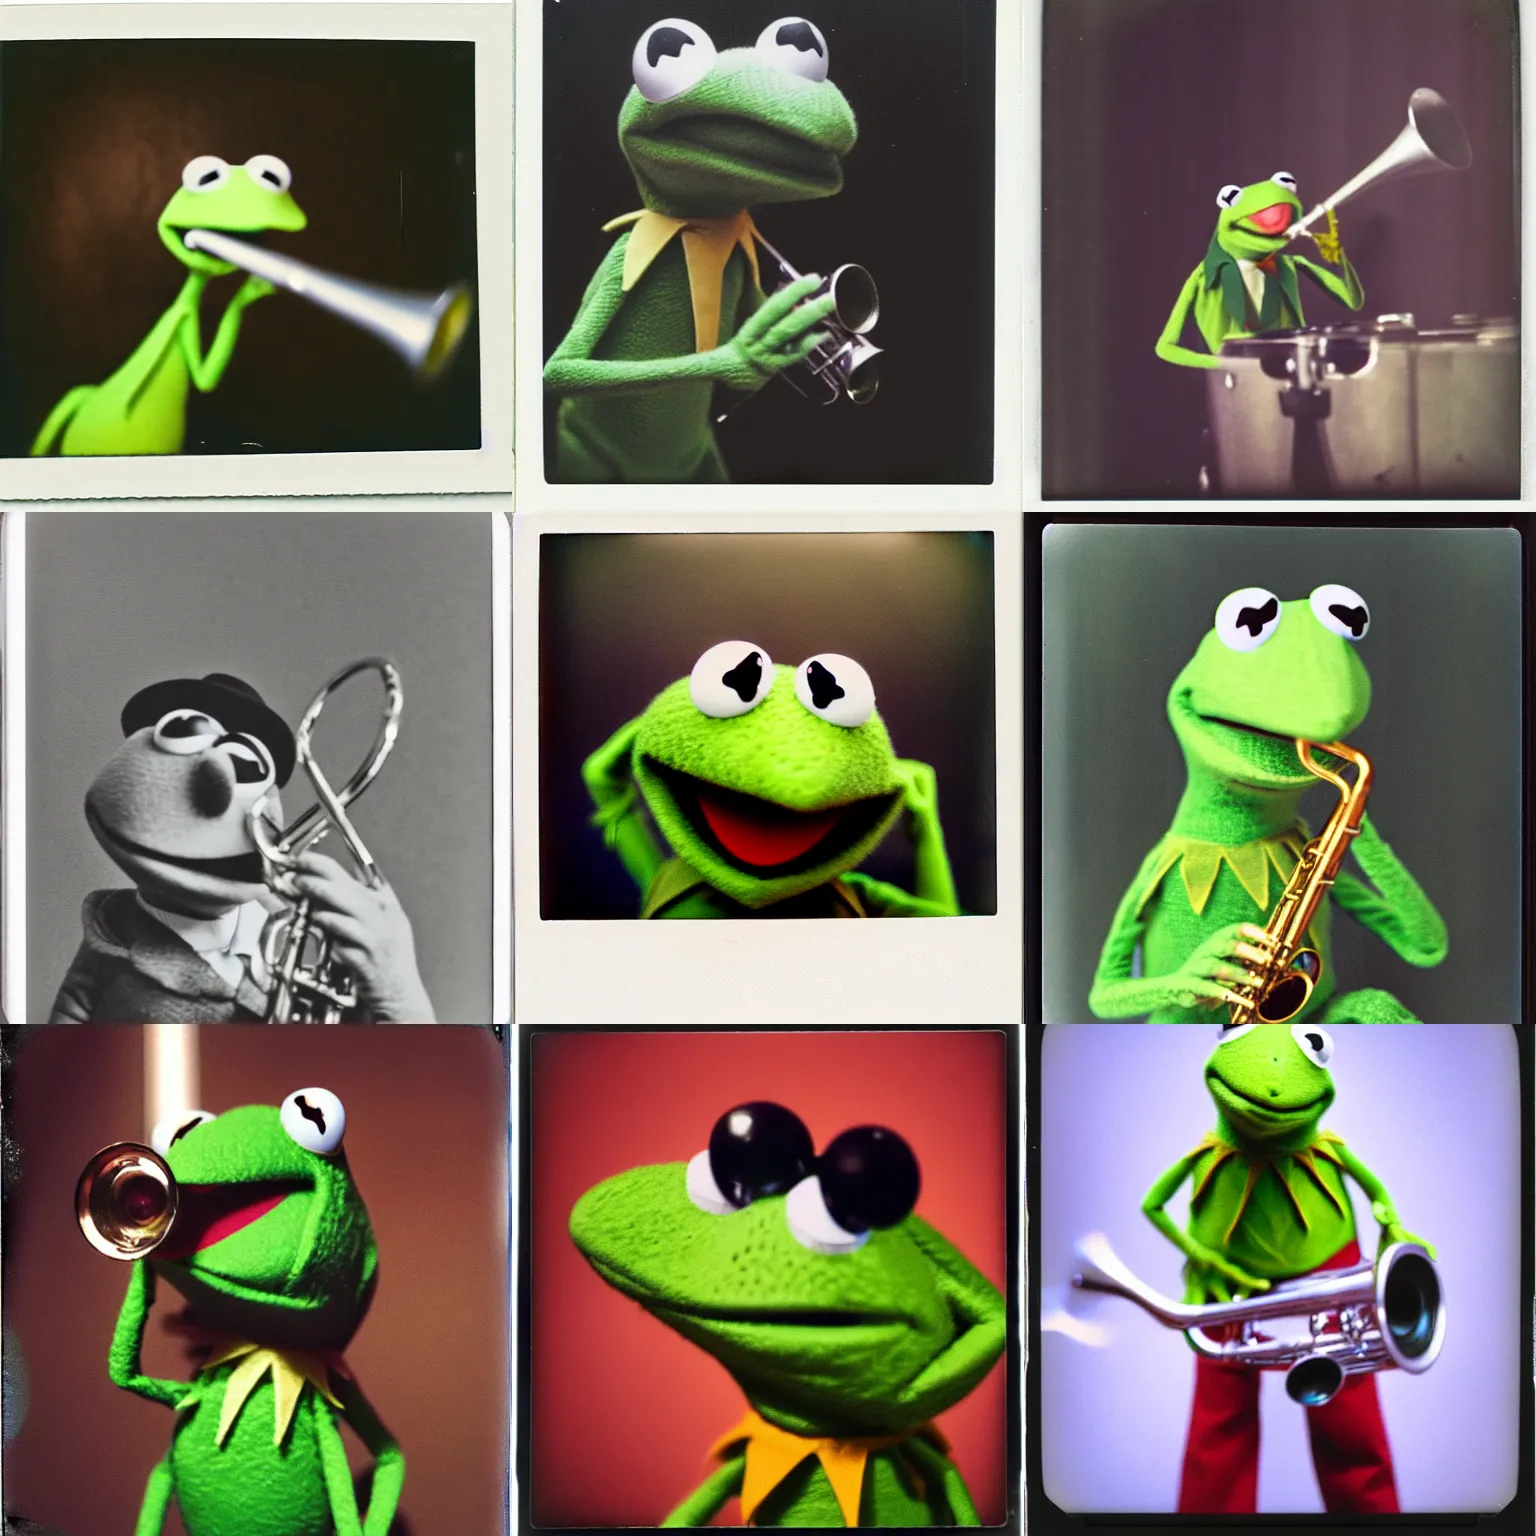 Prompt: a polaroid photograph of Kermit the Frog playing the trumpet, fisheye